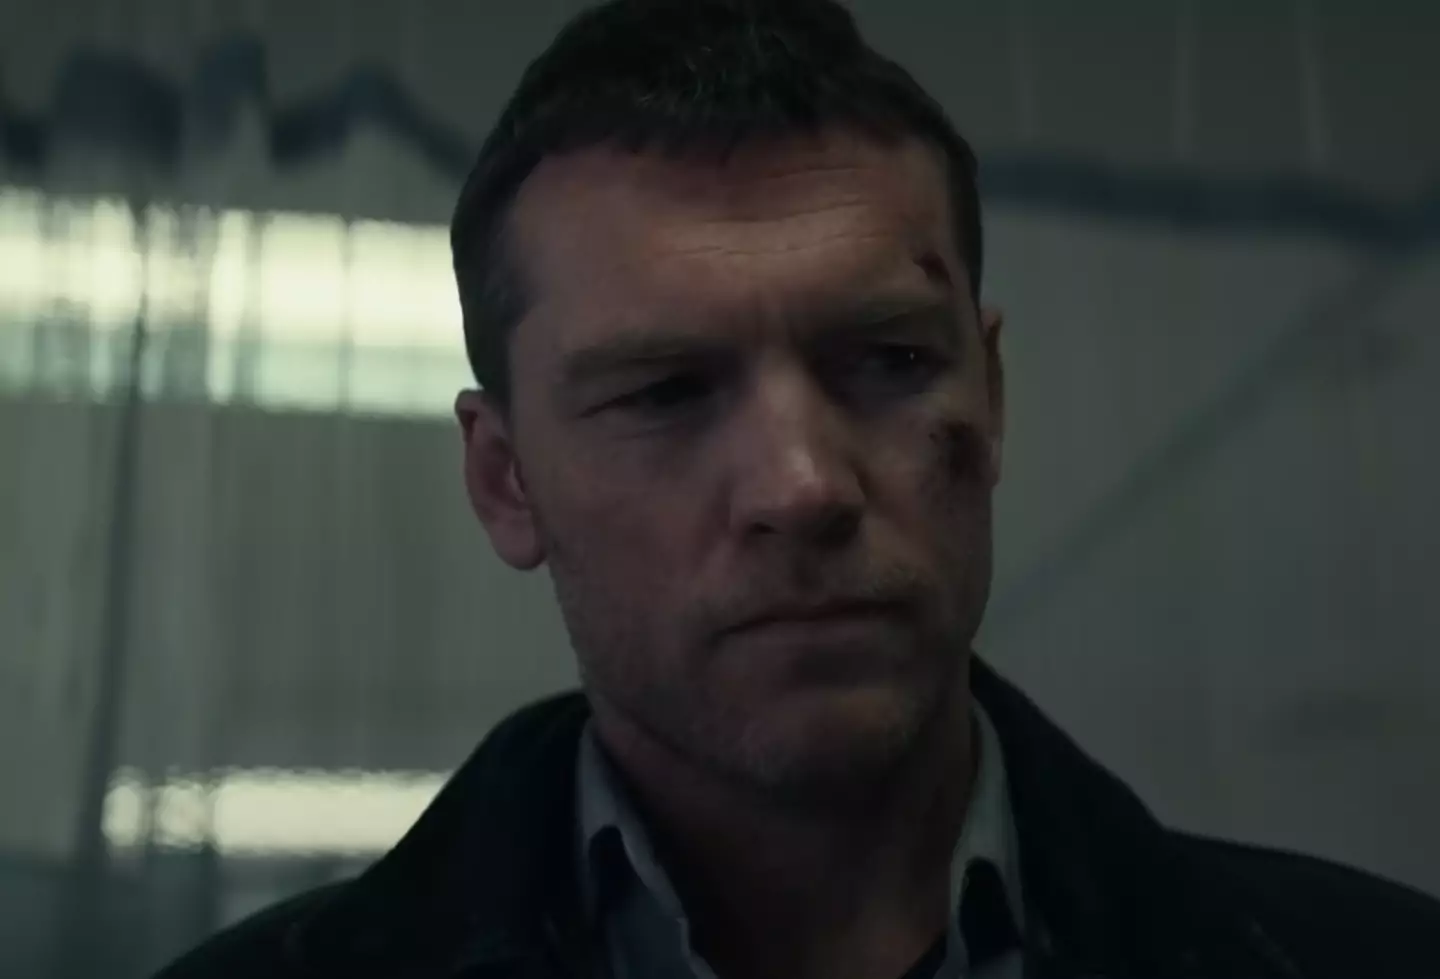 fans of the thriller have said that Fractured, starring Sam Worthington, really hits the spot.